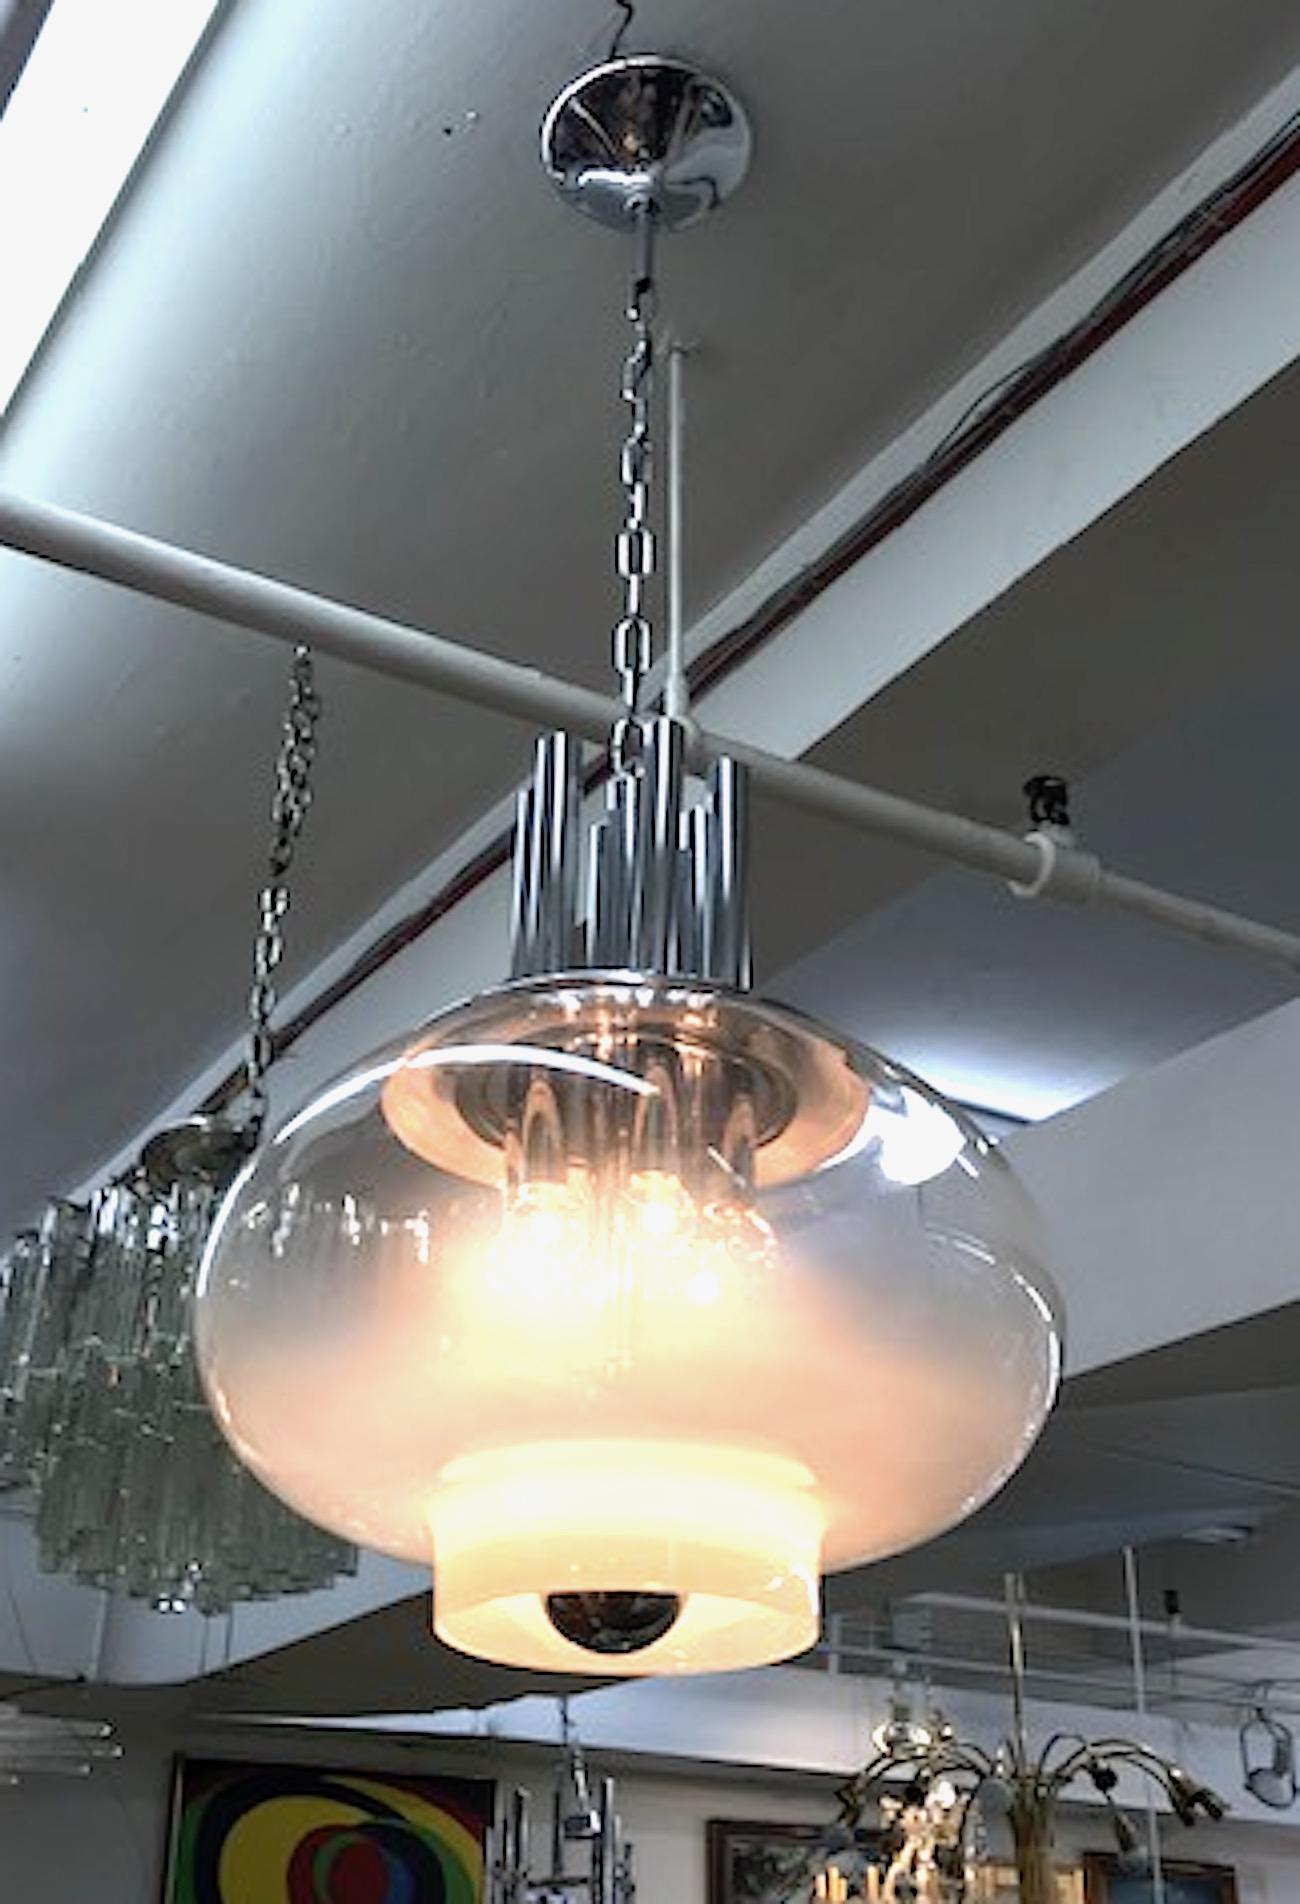 Large and sculptural Italian 1970s chrome and glass pendant light. A hand blown clear and white Murano glass shade houses six interior candelabra bulb lights and is suspended from a sculptural chromed top piece. A standard socket, shown here with a